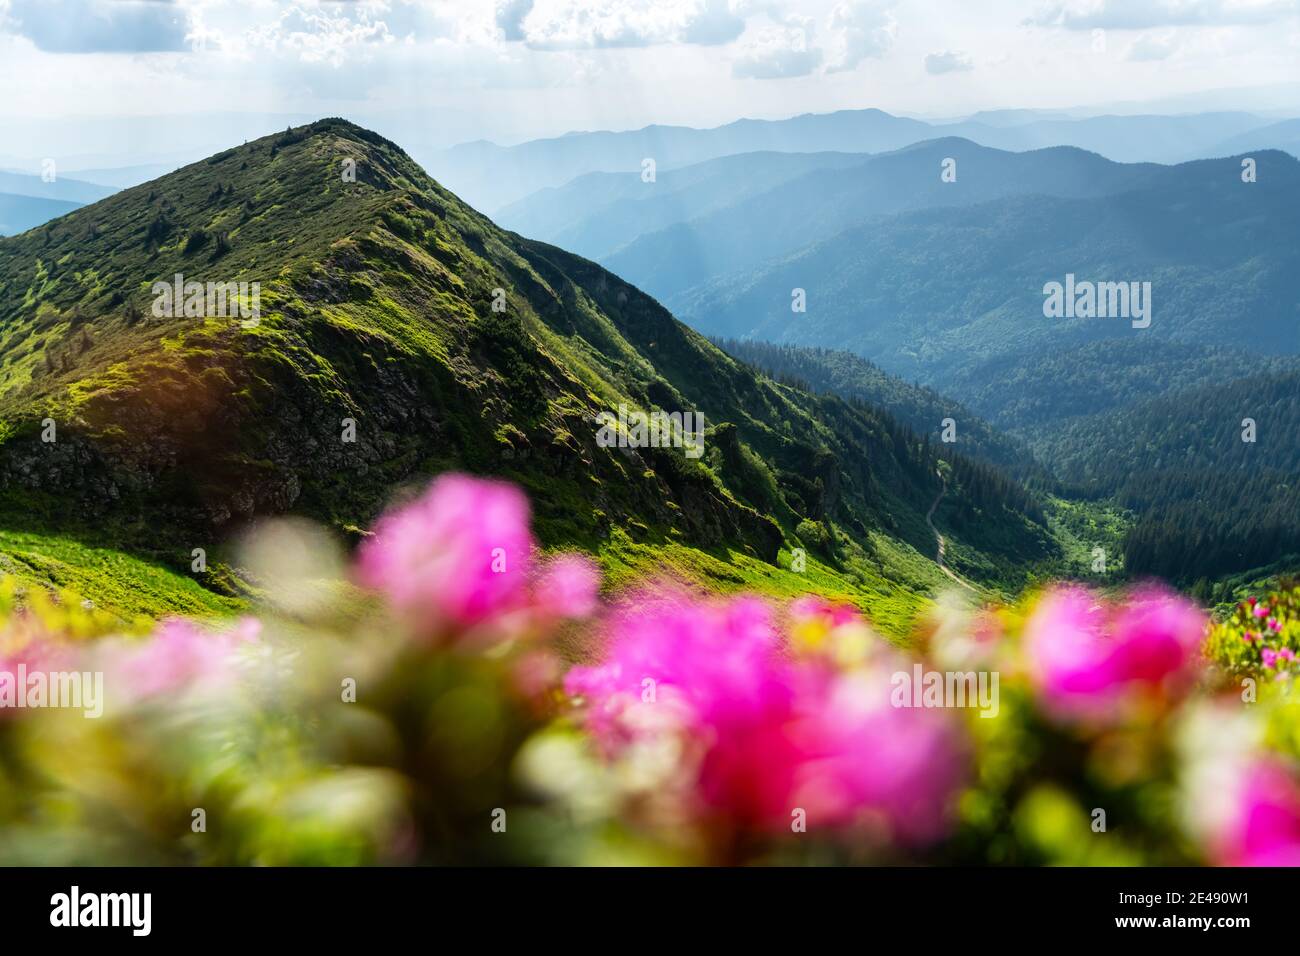 Rhododendron flowers covered mountains meadow in summer time. Beauty sunrise light glowing on a foreground. Landscape photography Stock Photo